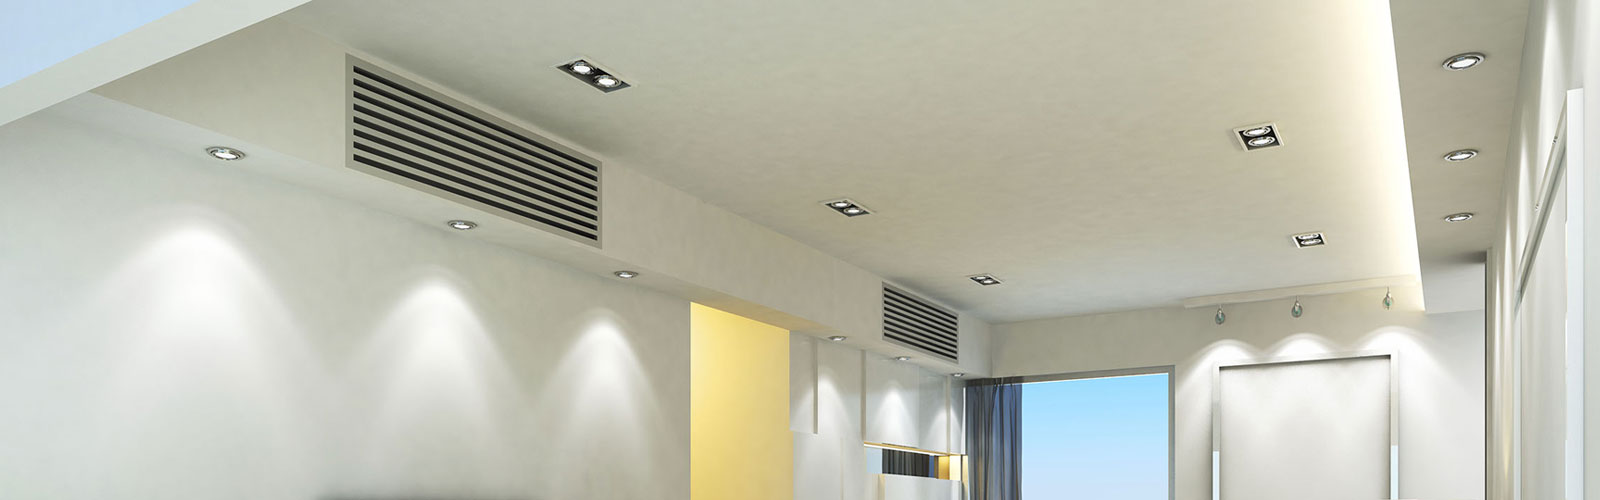 Ducted heating installation services